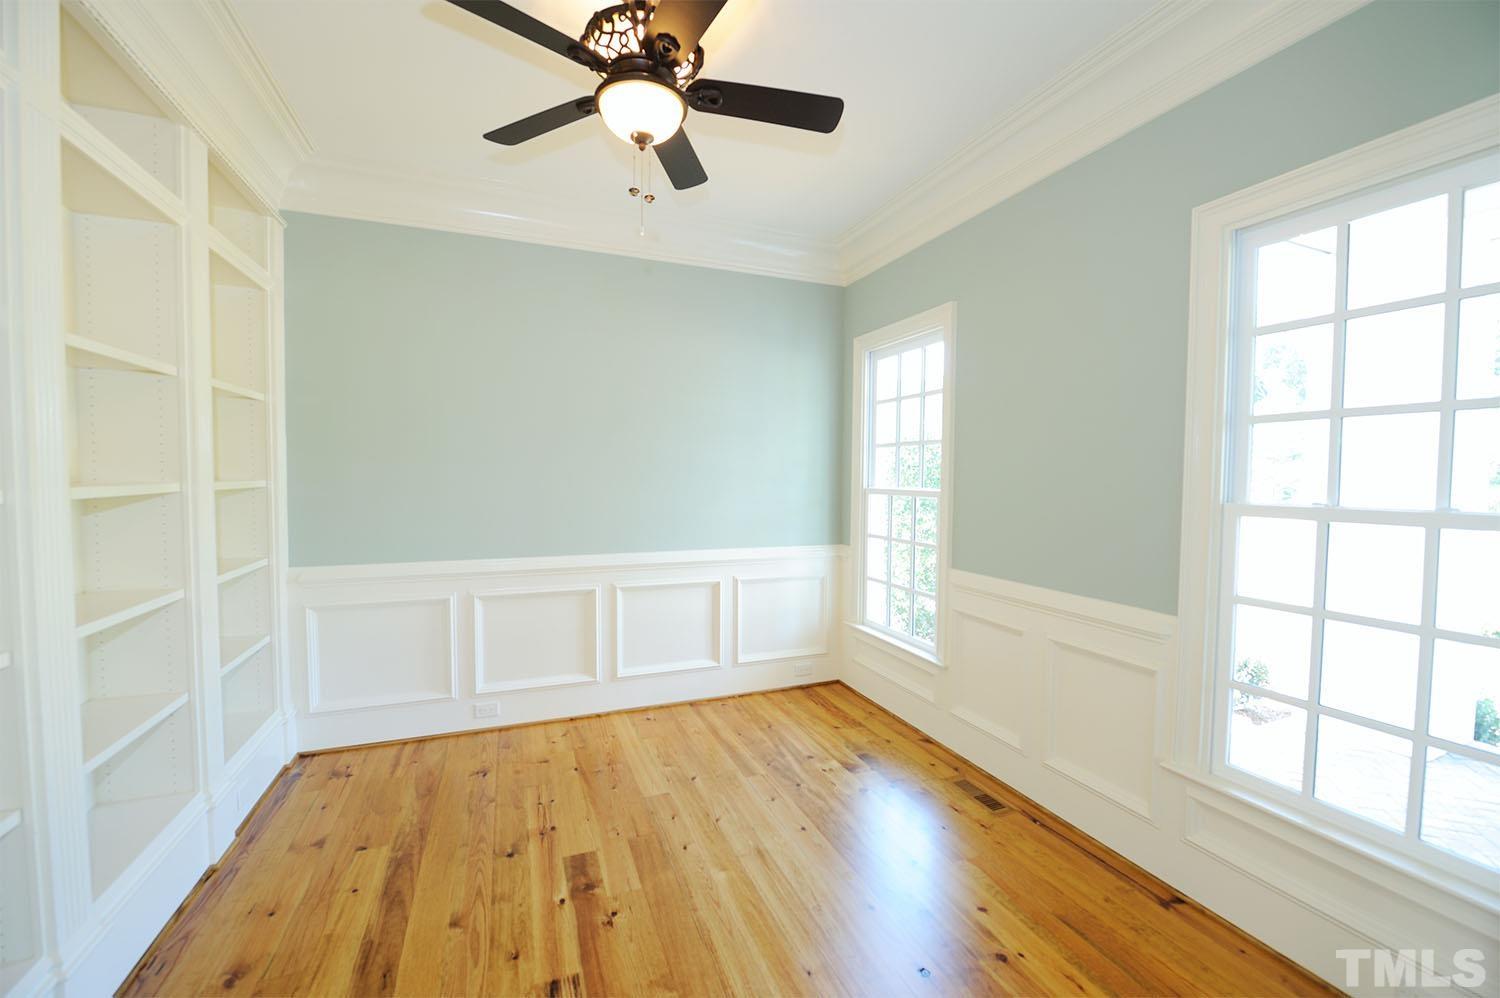 Located off of the foyer and has custom wood bookshelves, wainscoting and heavy crown molding.